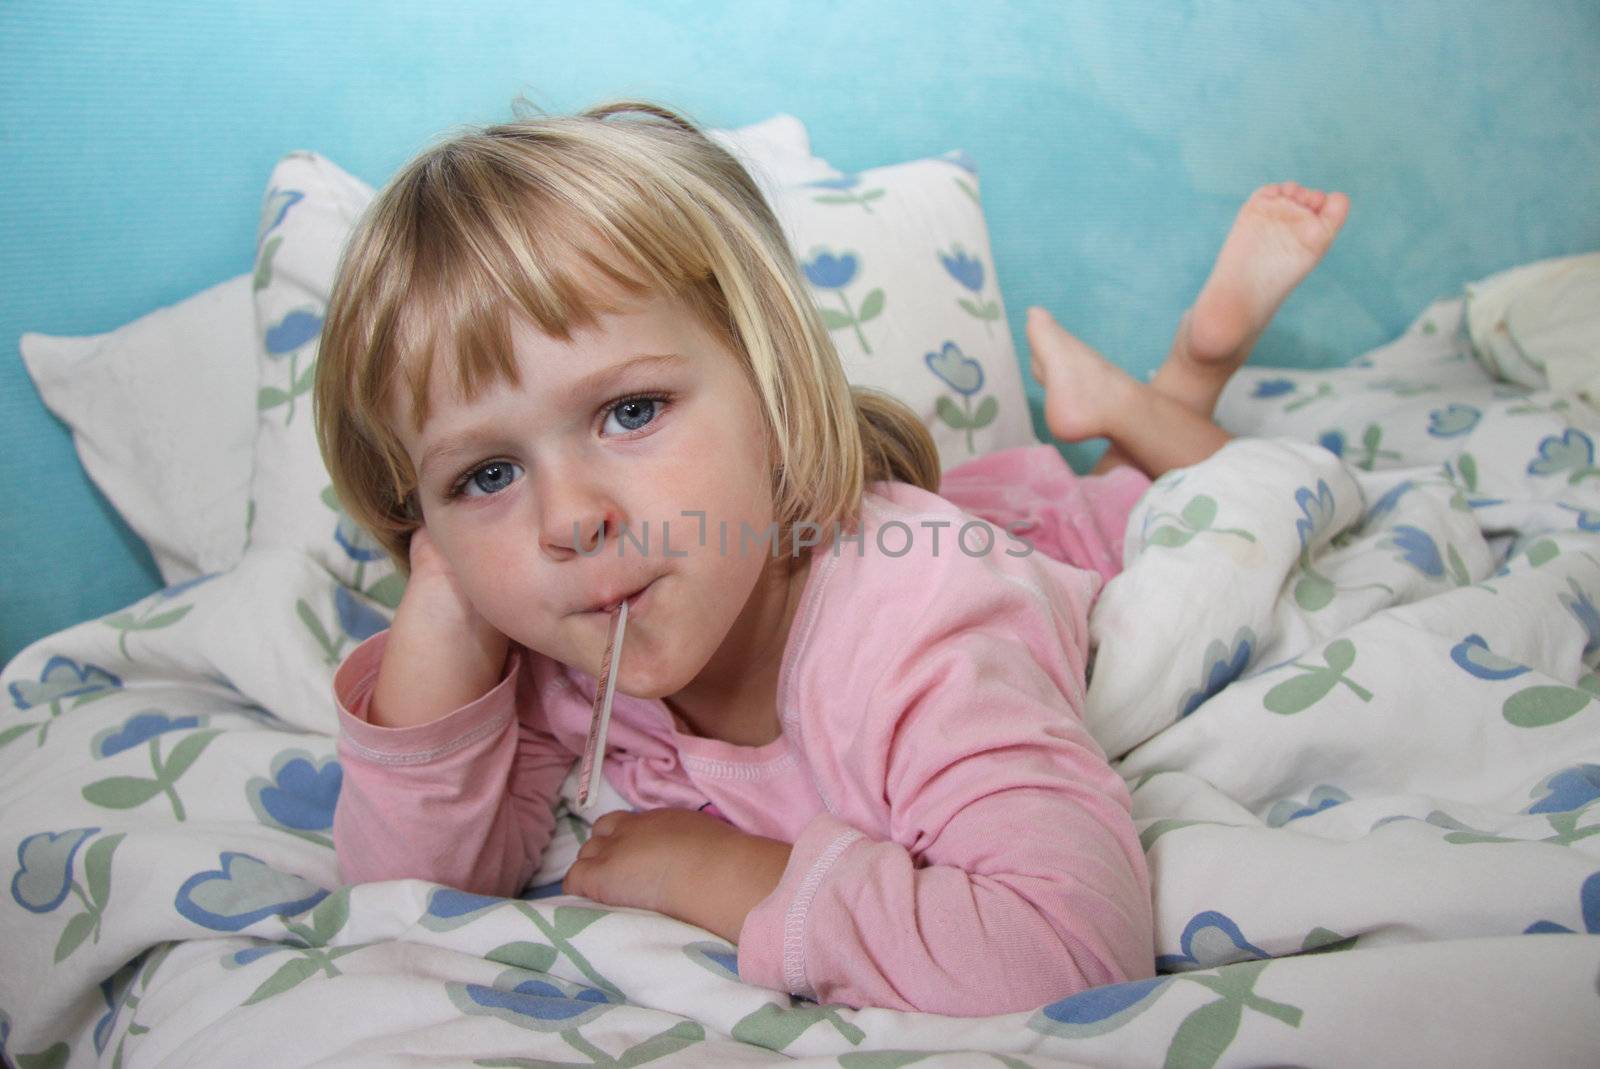 A sick girl lying in bed, having her temperature checked